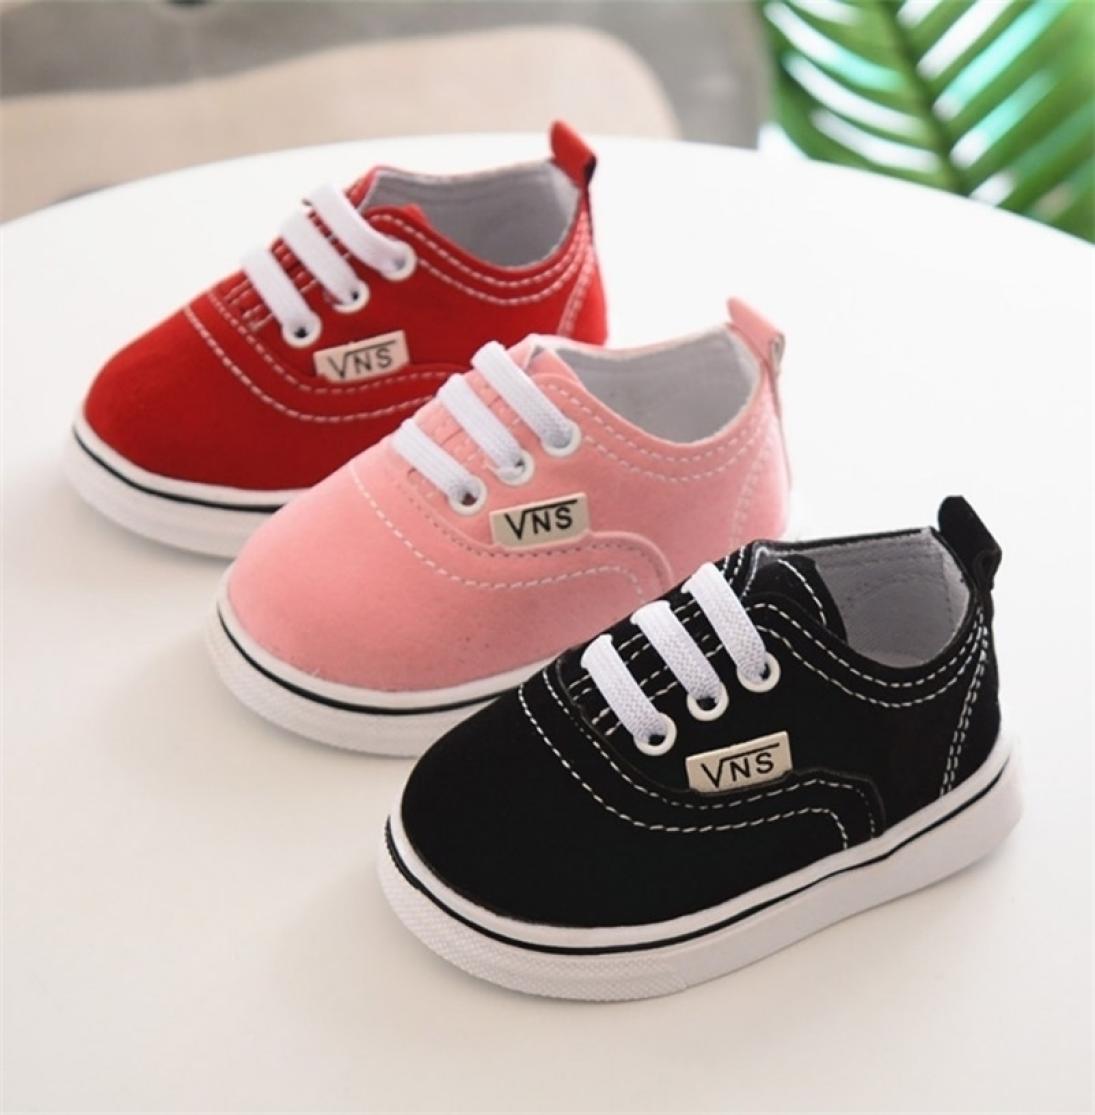 

Newborn Baby Shoes Toddler Baby Girl Shoes Spring soft Canvas First Walkers Sports Causal shoes 024M 2012228516711